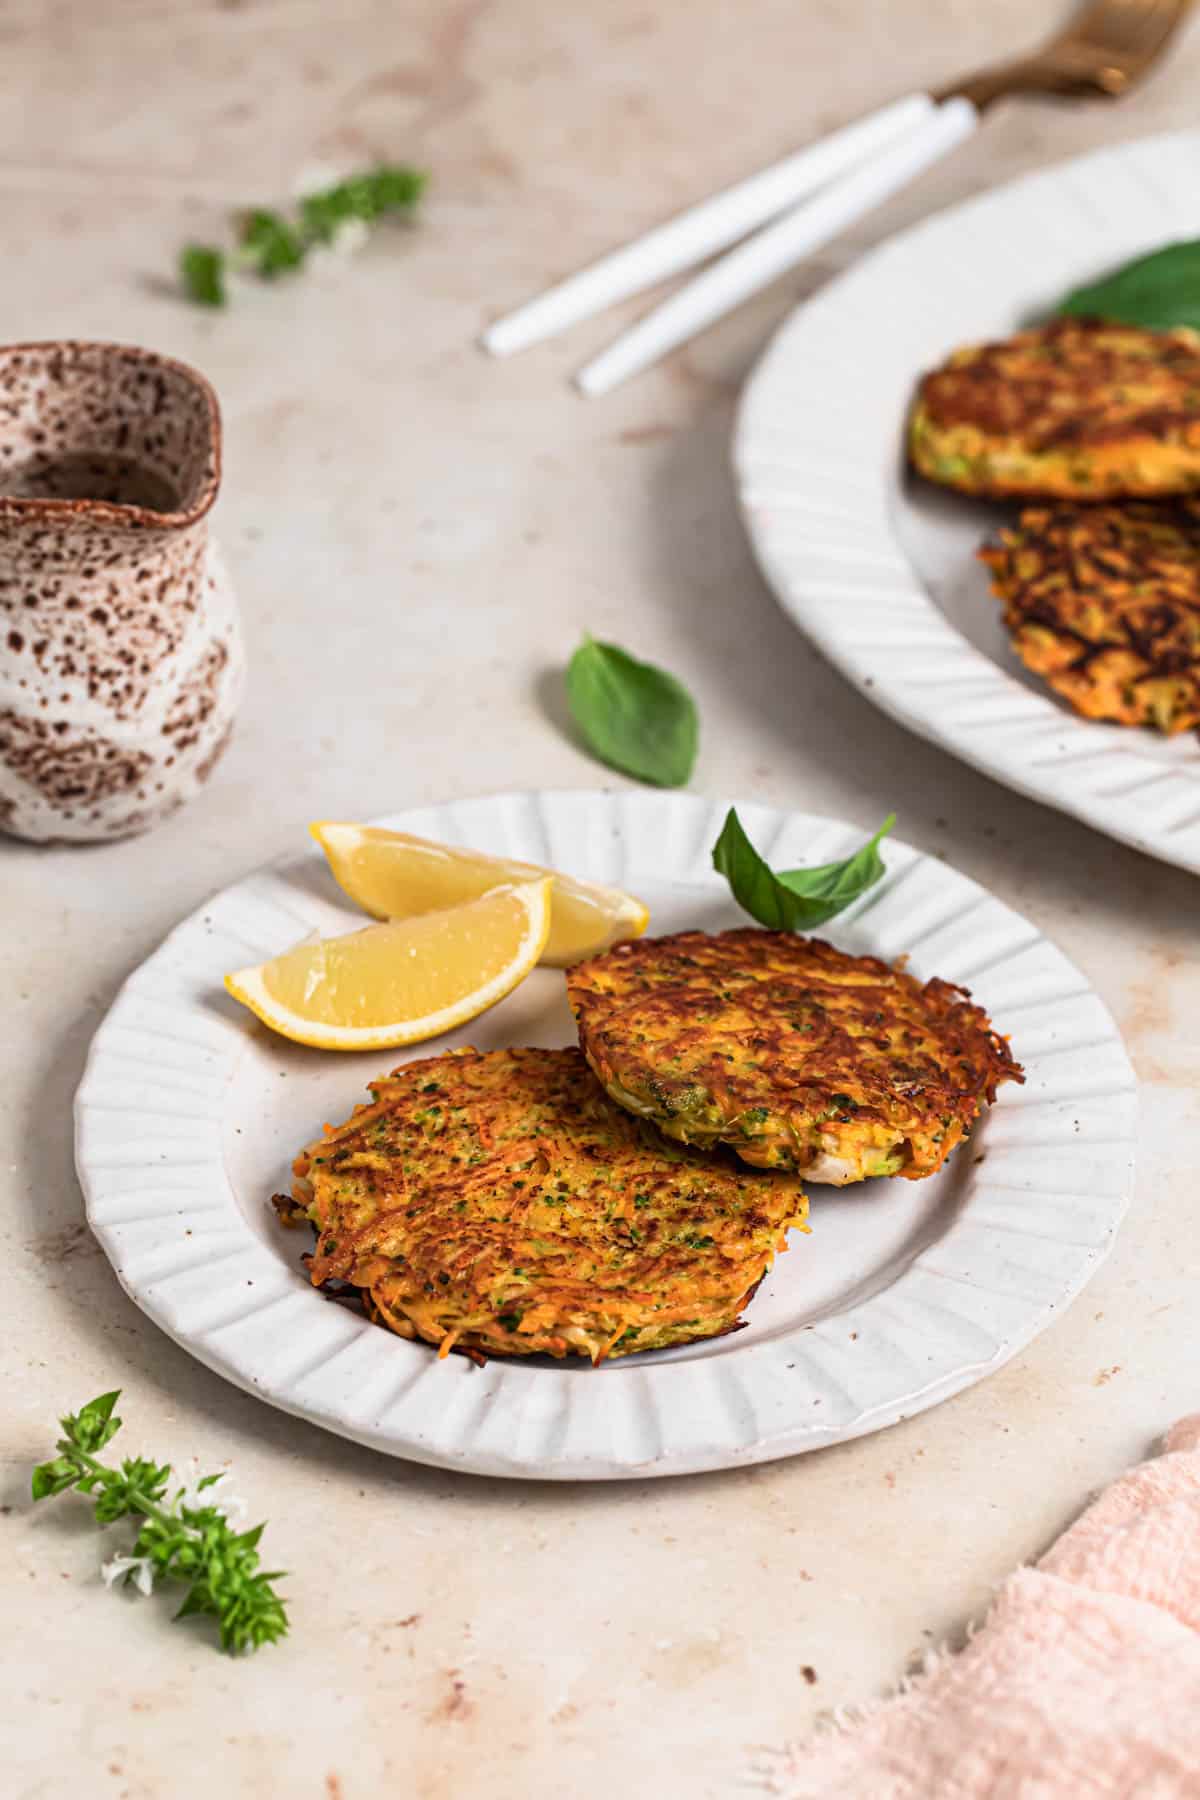 Two broccoli sweet potato fritters on a plate with lemon wedges and basil.